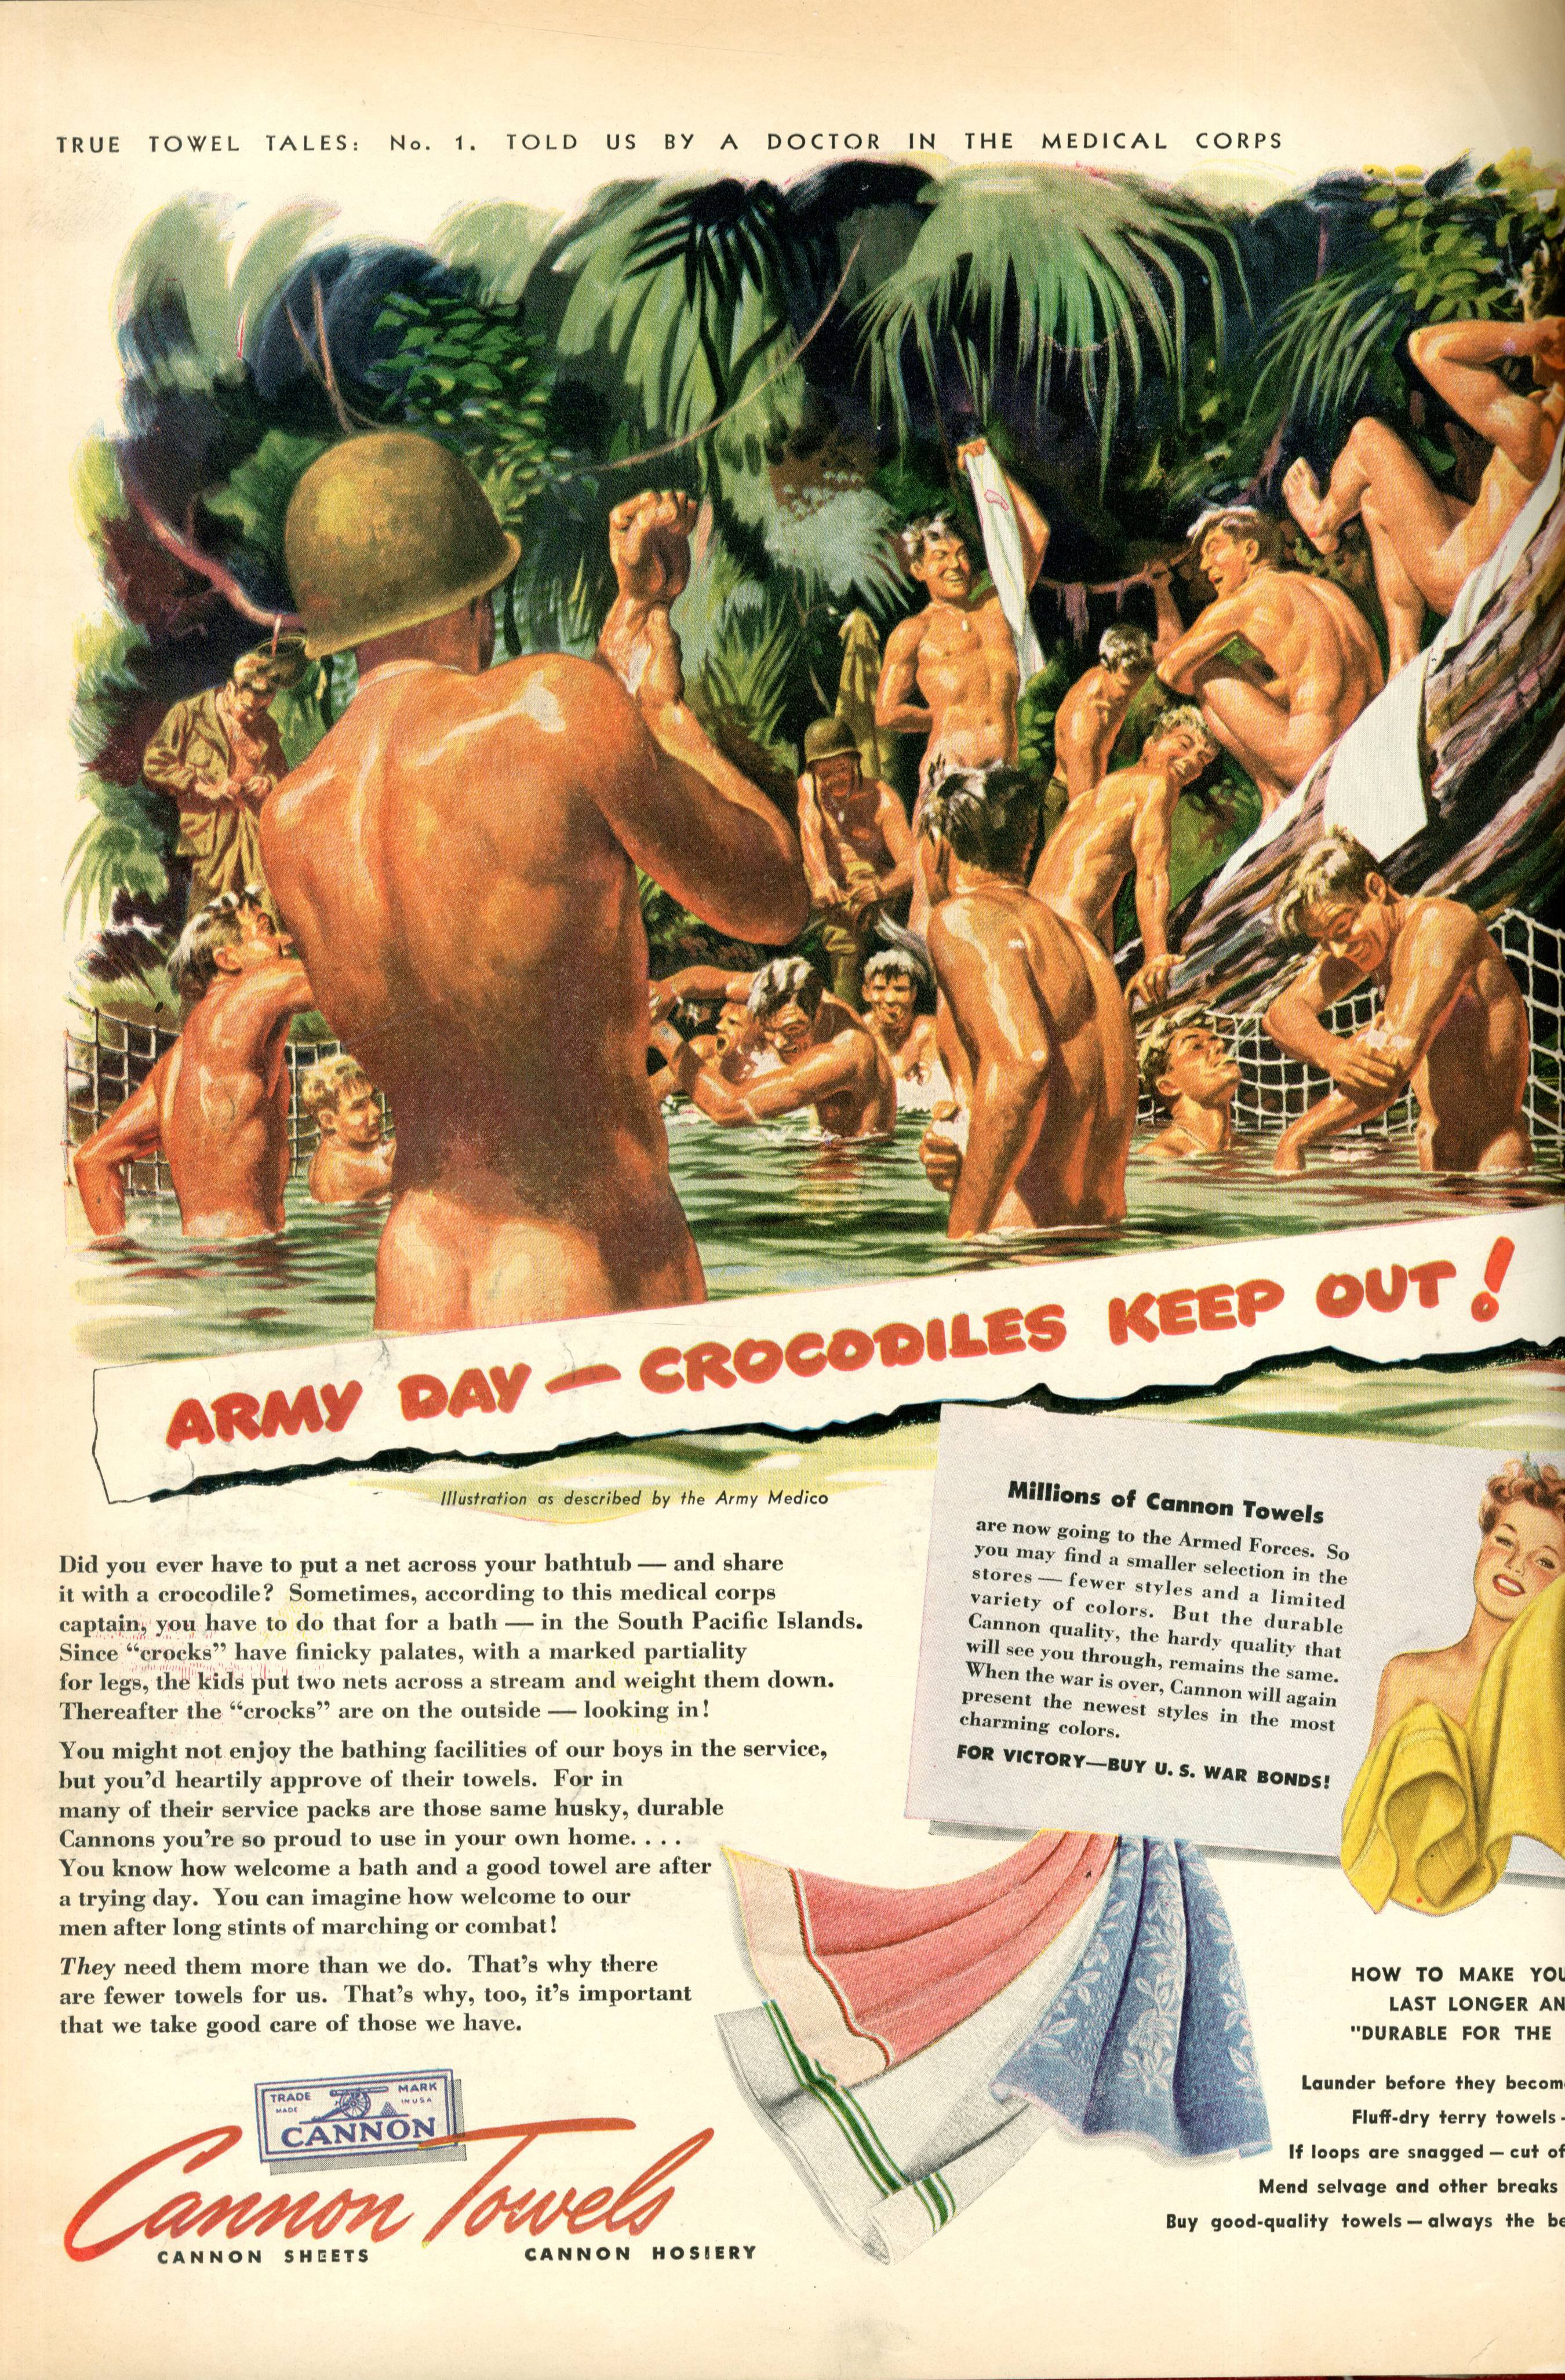 Cannon Towels advertisement; Army day - crocodiles keep out